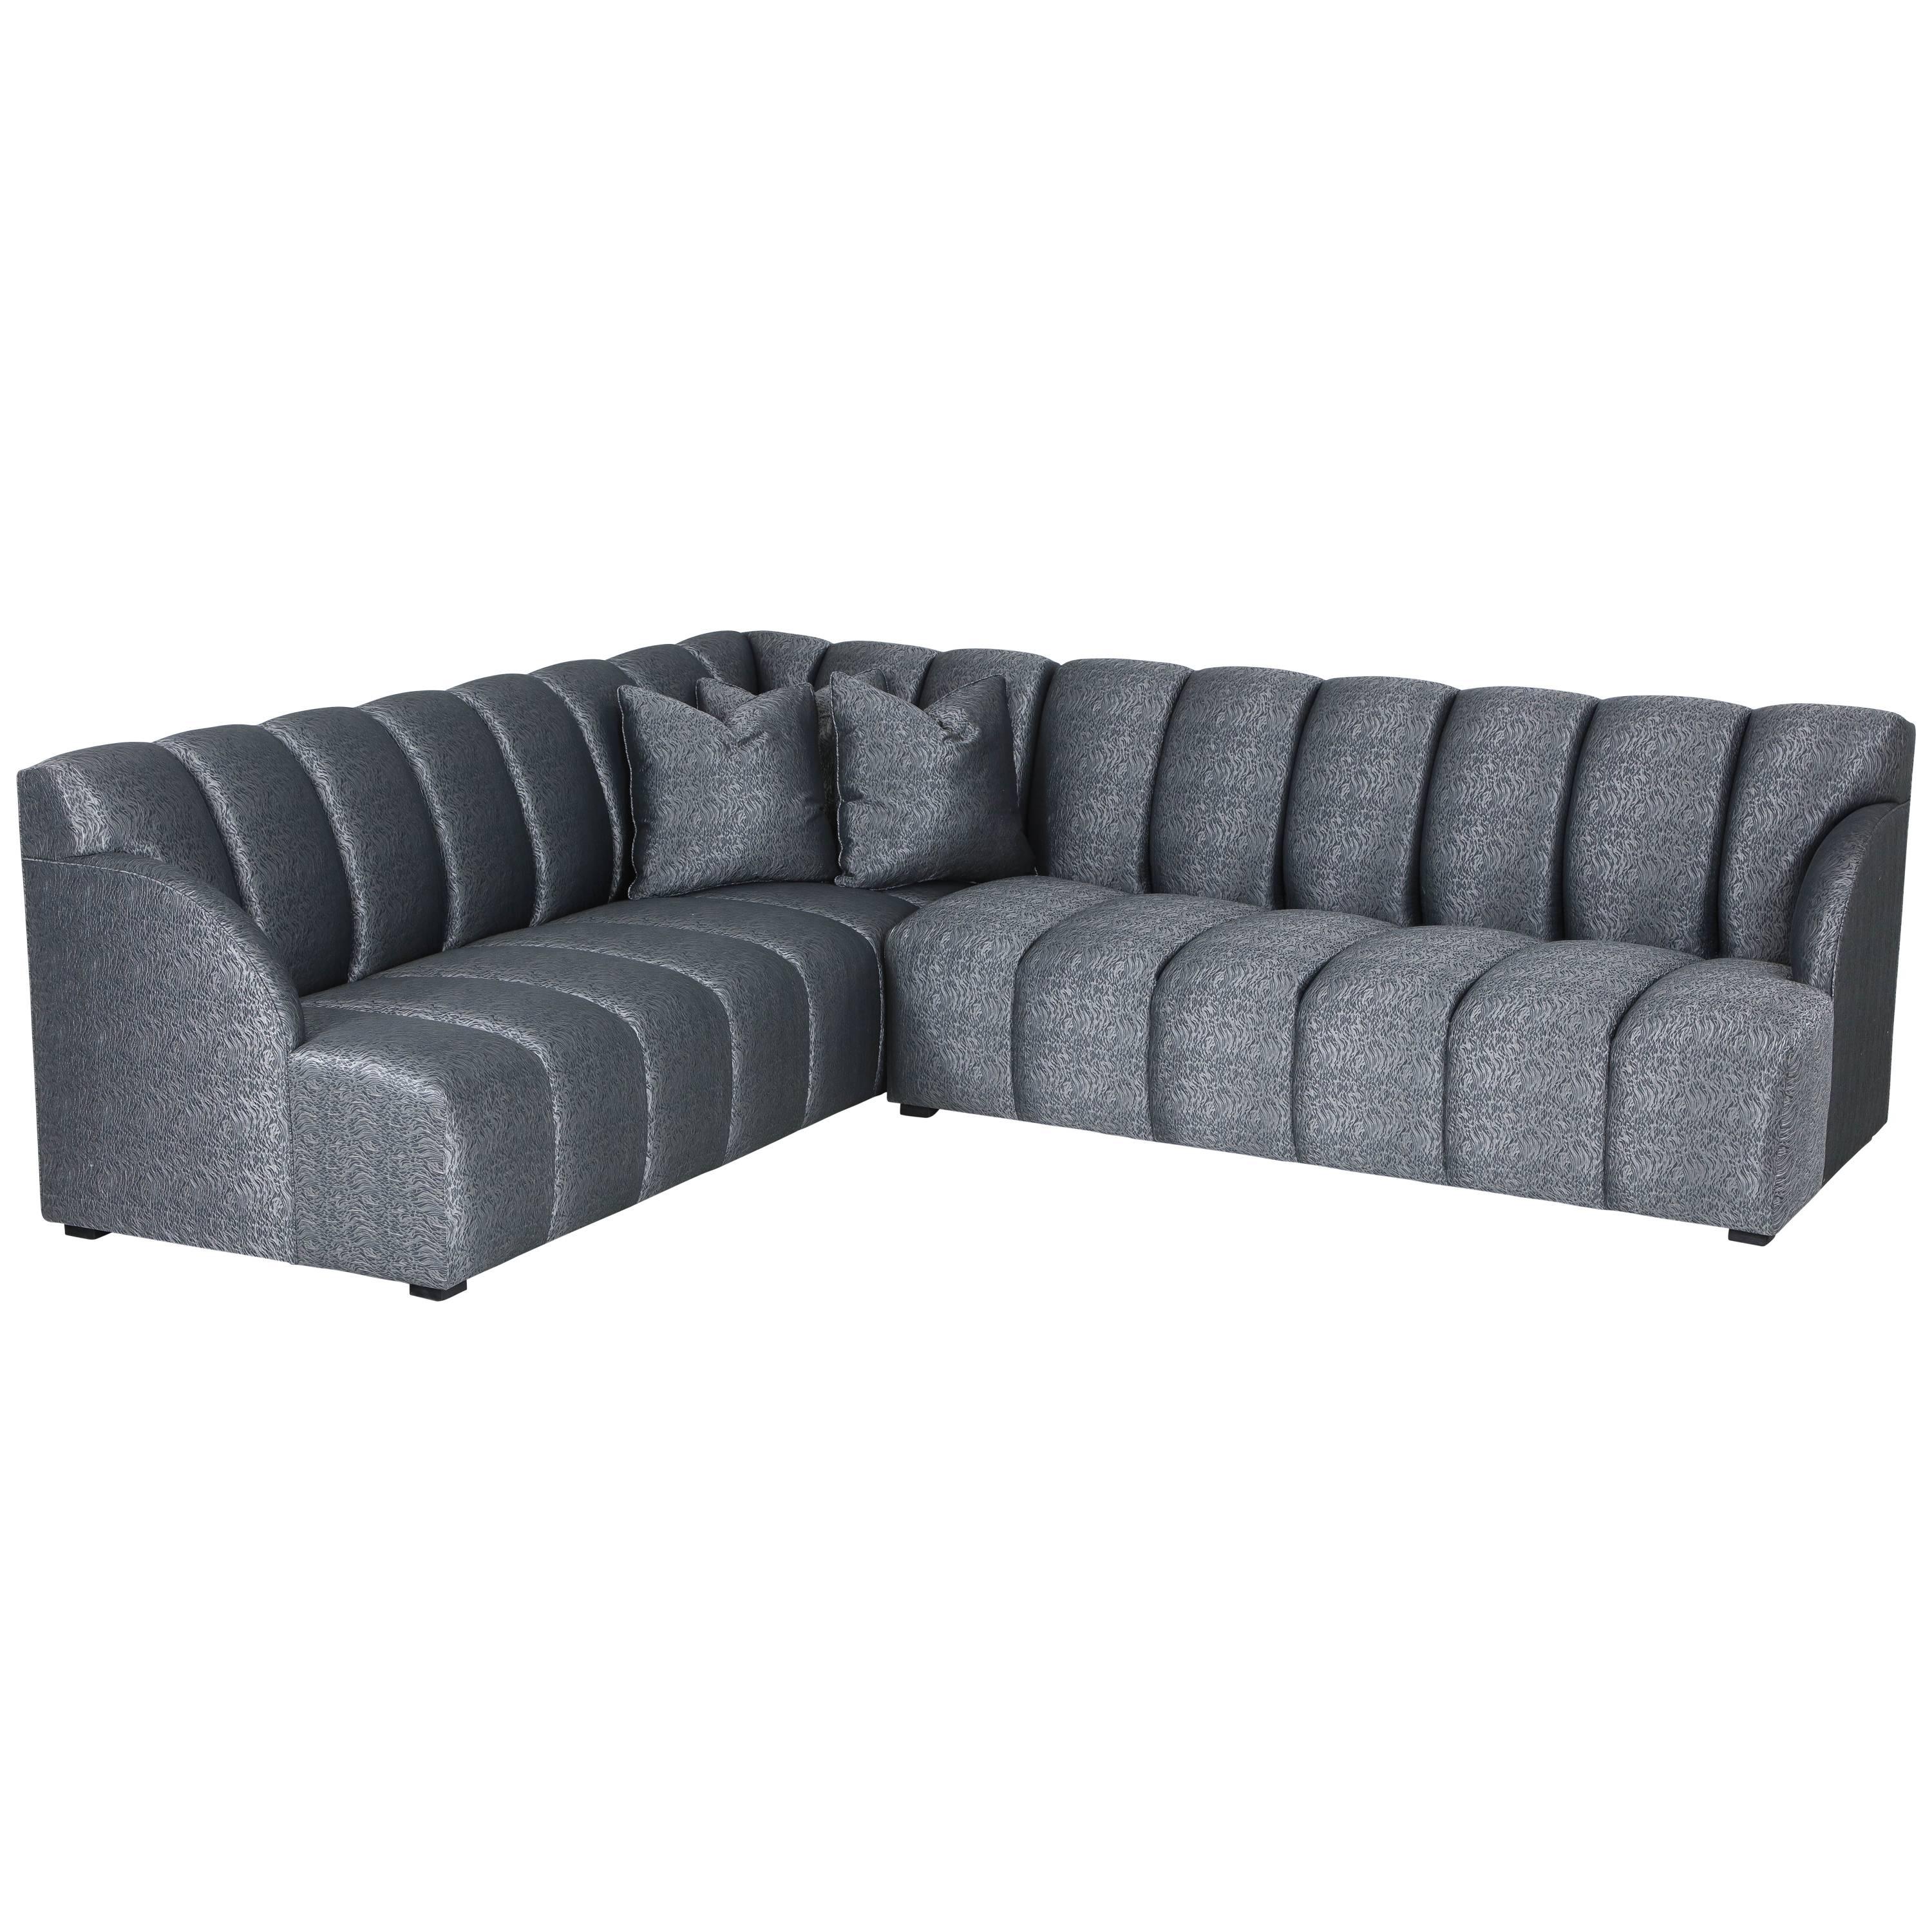 Steve Chase Channel Tufted Sectional Sofa